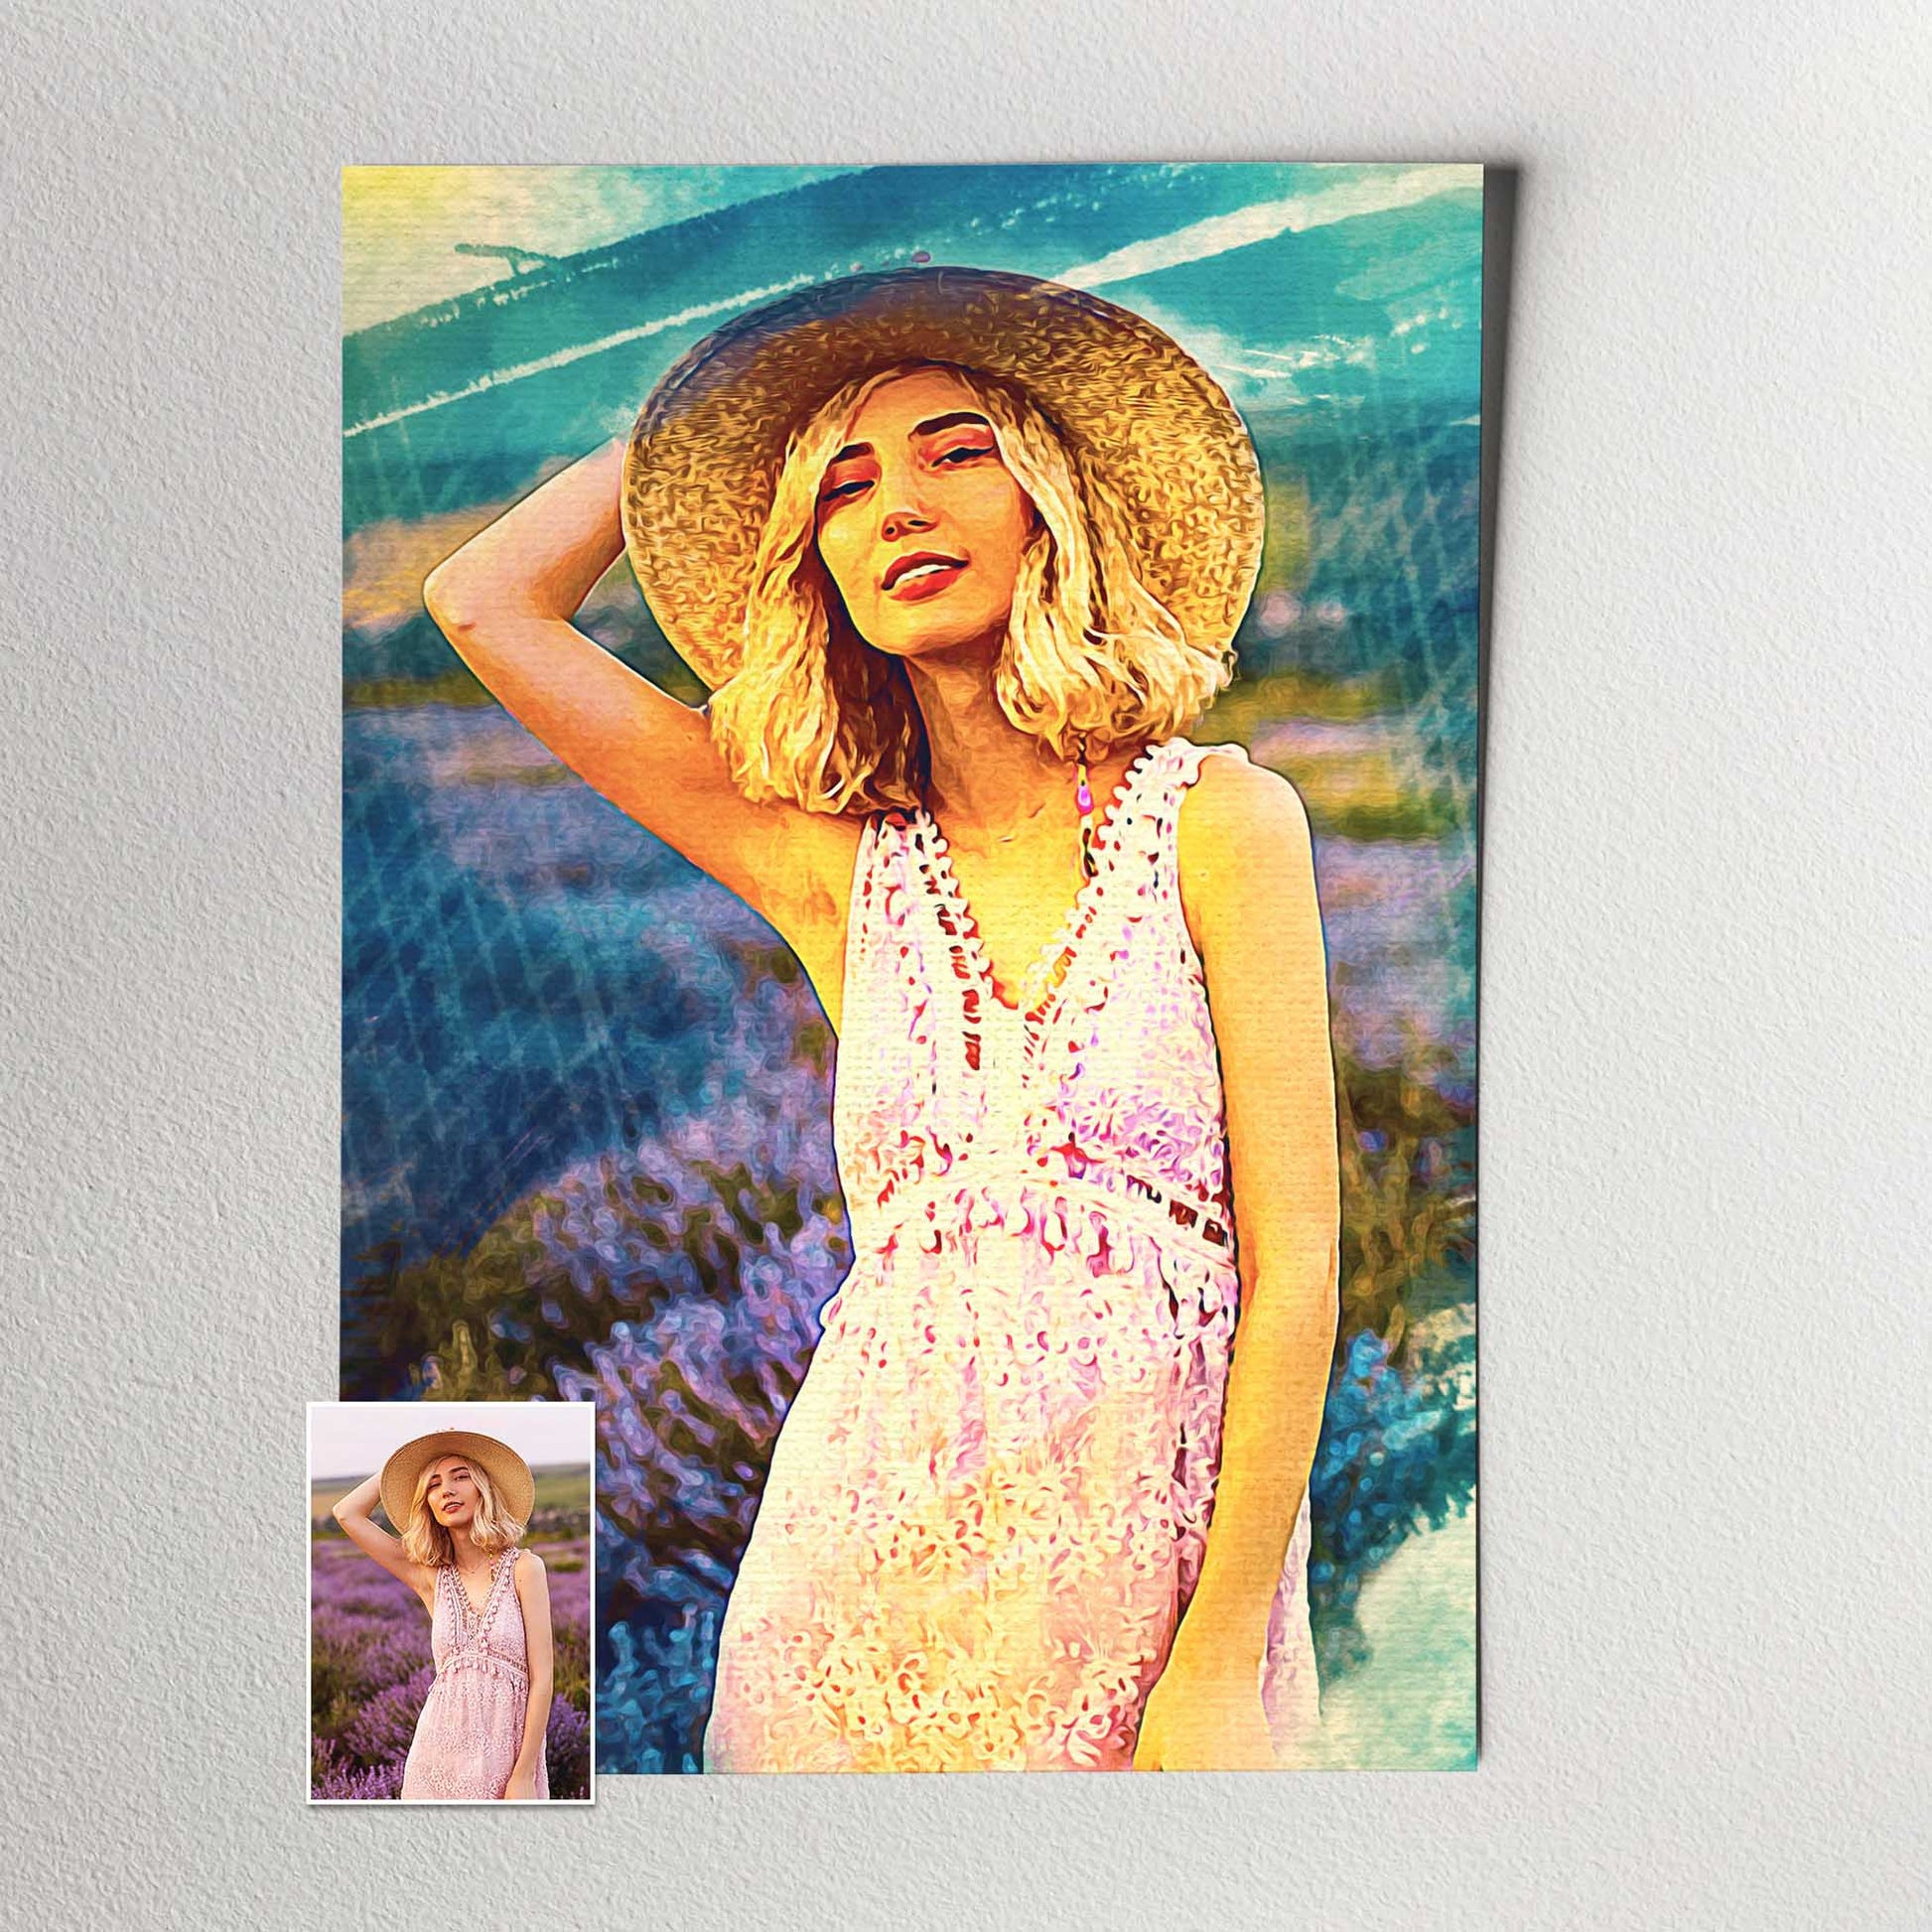 Experience the magic of a Personalised Brush Painting Print, where your photo comes to life in a beautiful watercolor style with a mesmerizing brushstroke effect. The enchanting purple, pink, and blue hues create a trendy and cool print